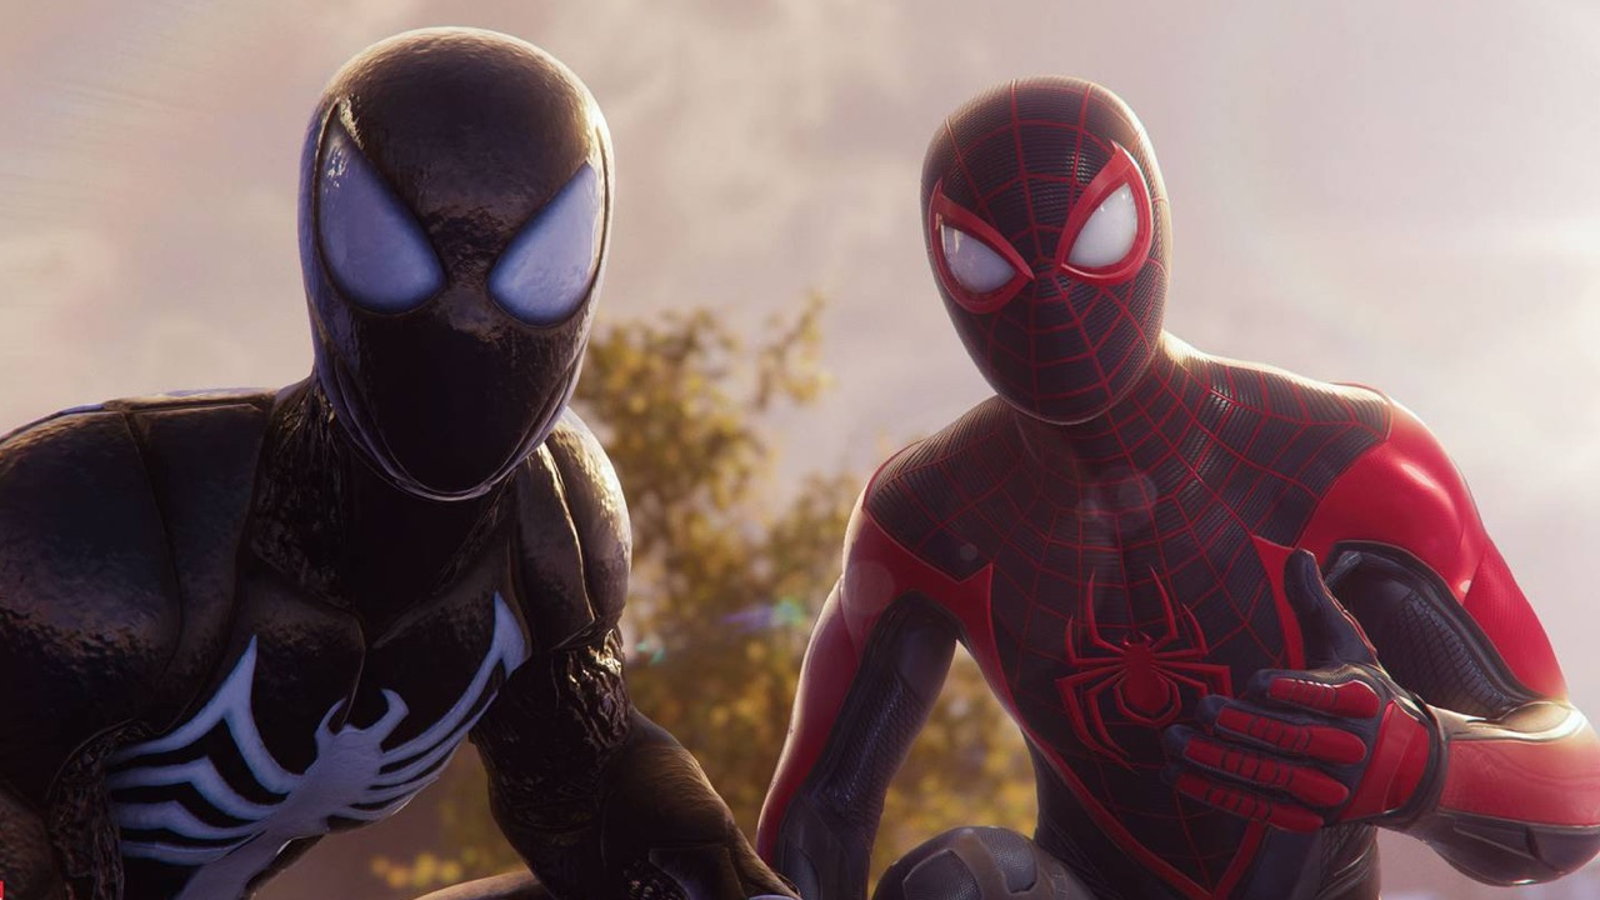 Here are the Marvel's Spider-Man 2 pre-order bonuses